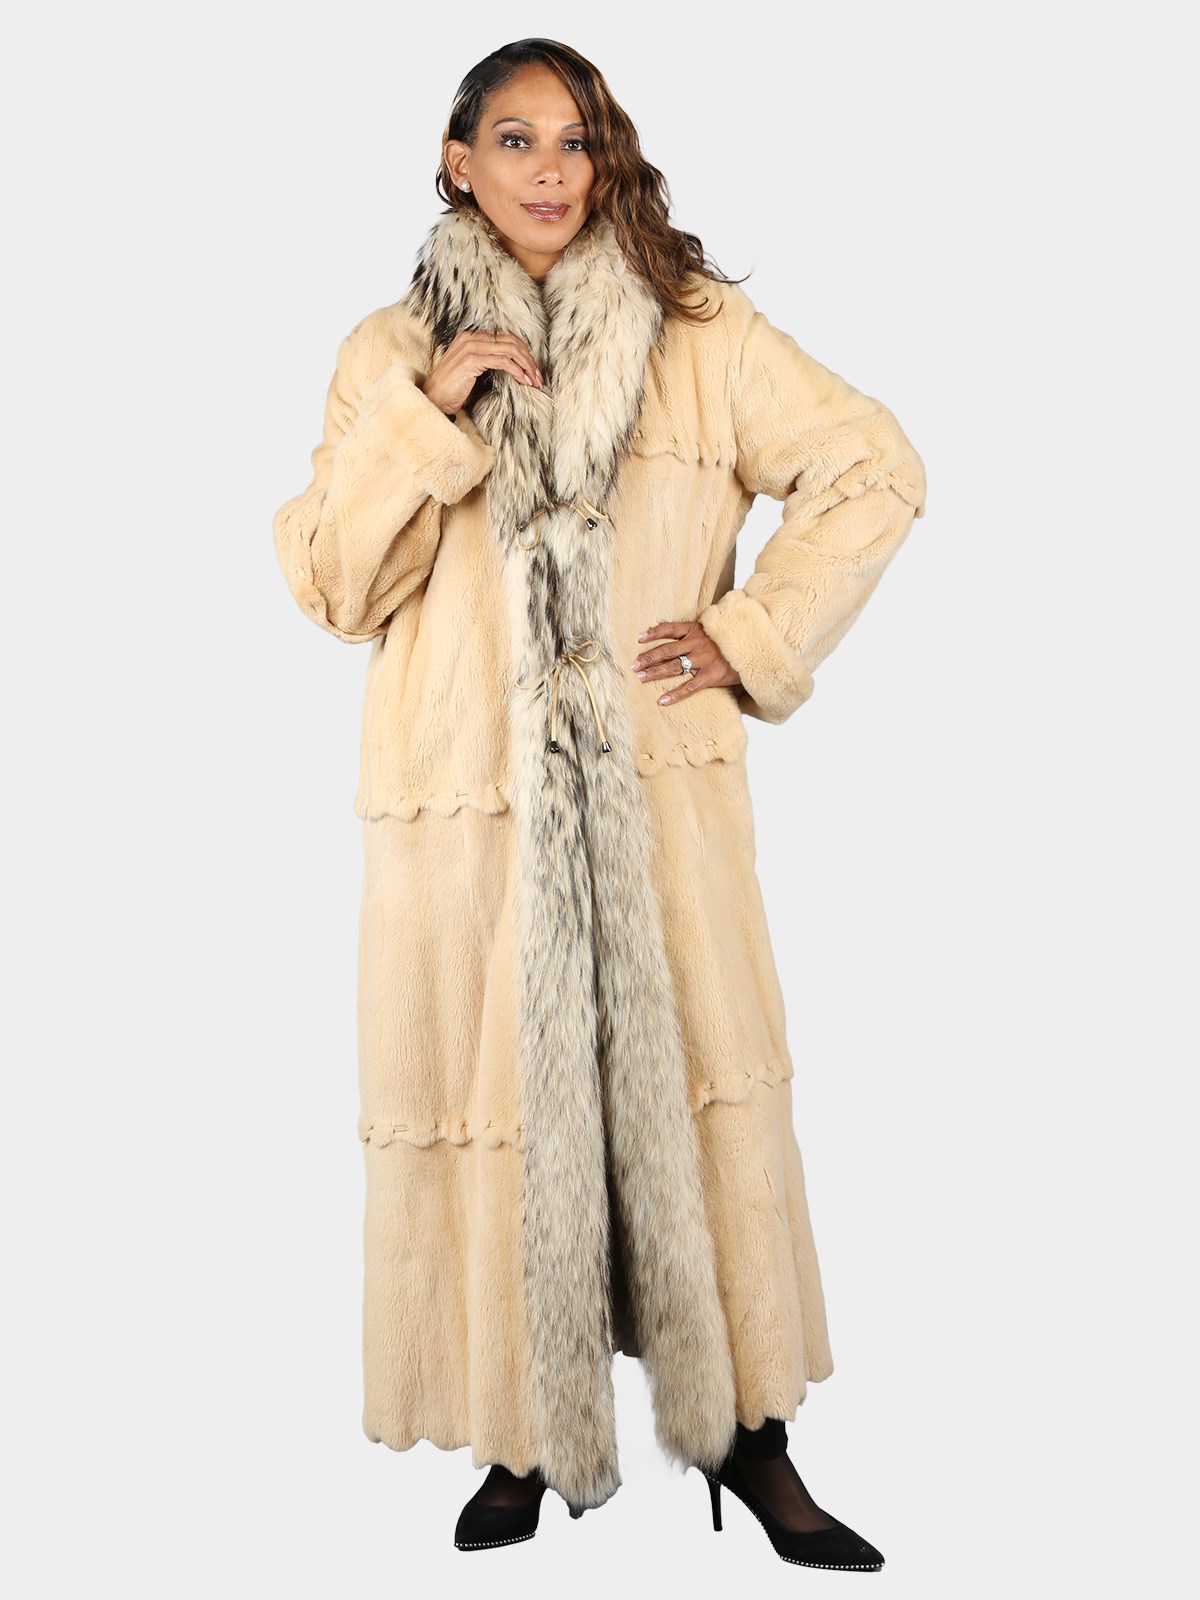  PUTEARDAT Women's Fur & Faux Fur Jackets & Coats Leather  Jackets For Woman clearance items under 1.00 my account with prime orders  sales today clearance prime only hot : Clothing, Shoes